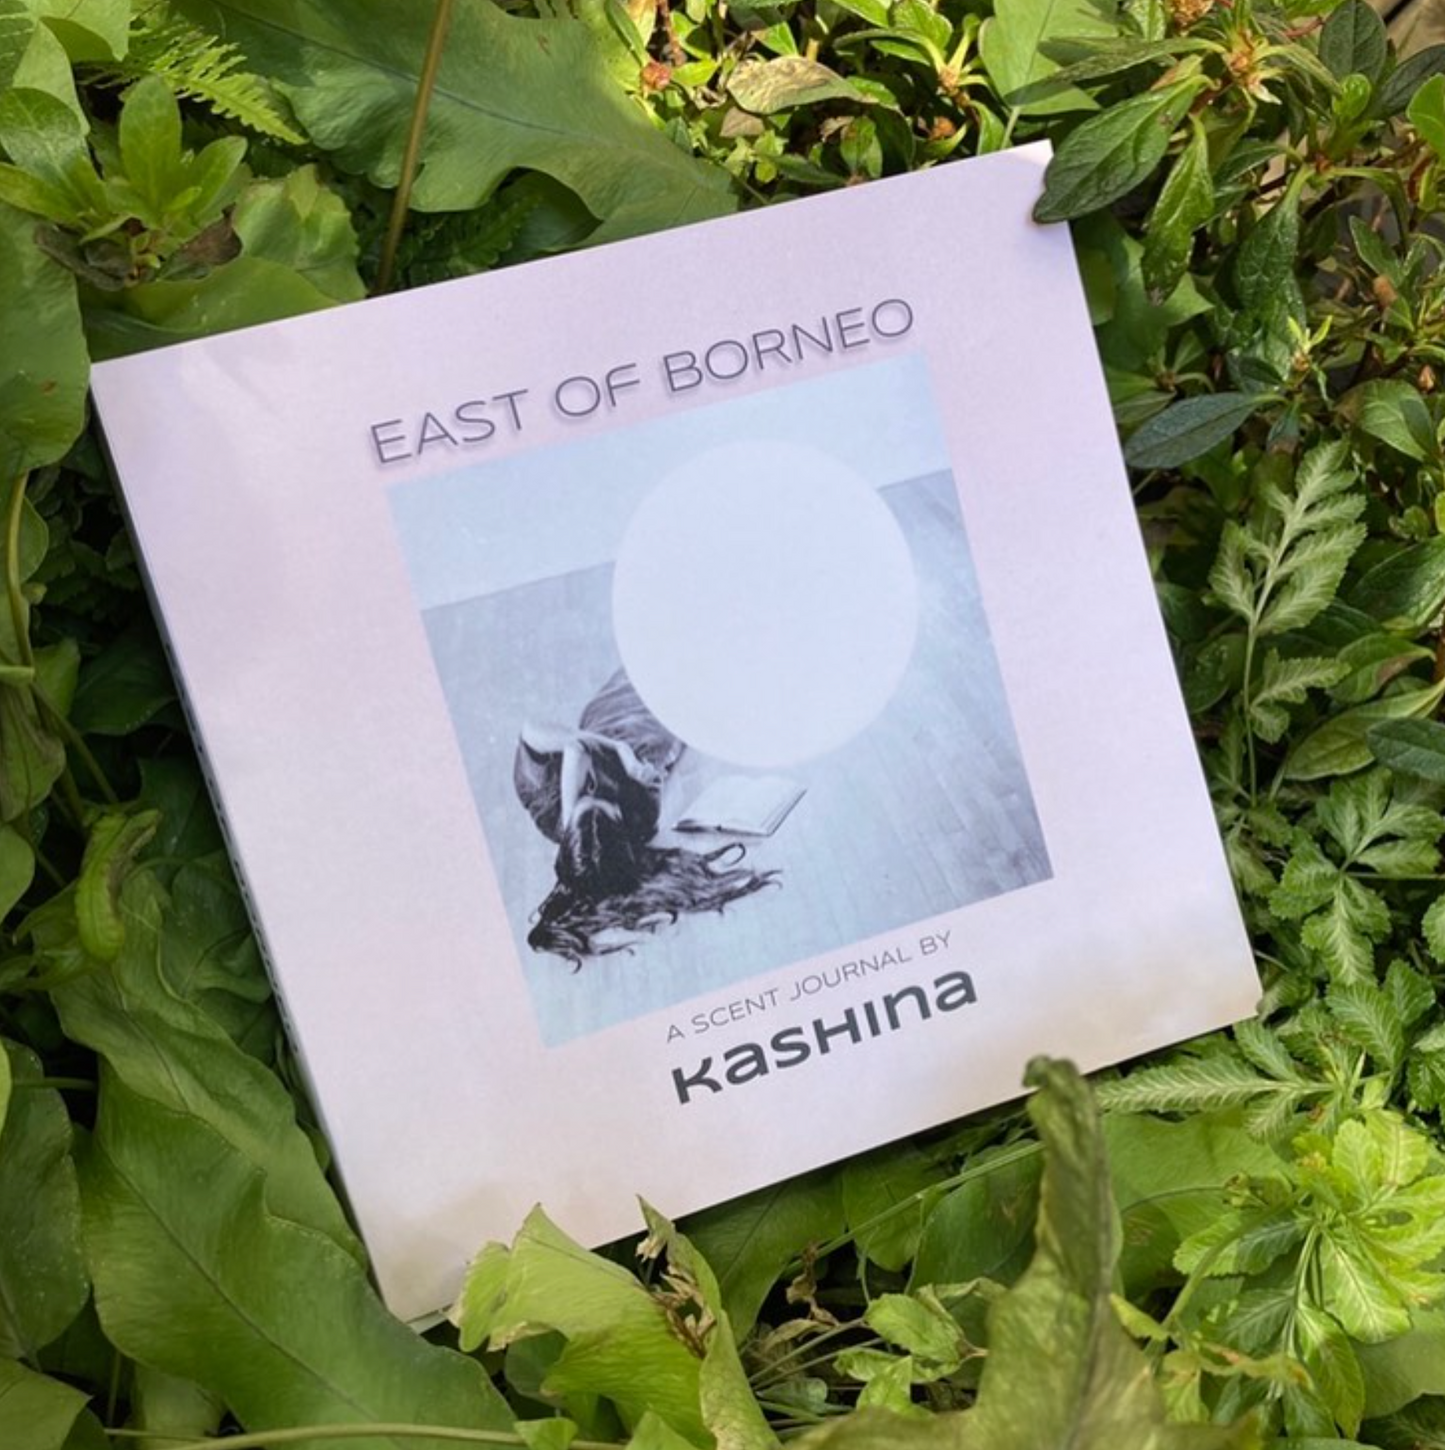 East of Borneo: A Scent Journal by Kashina